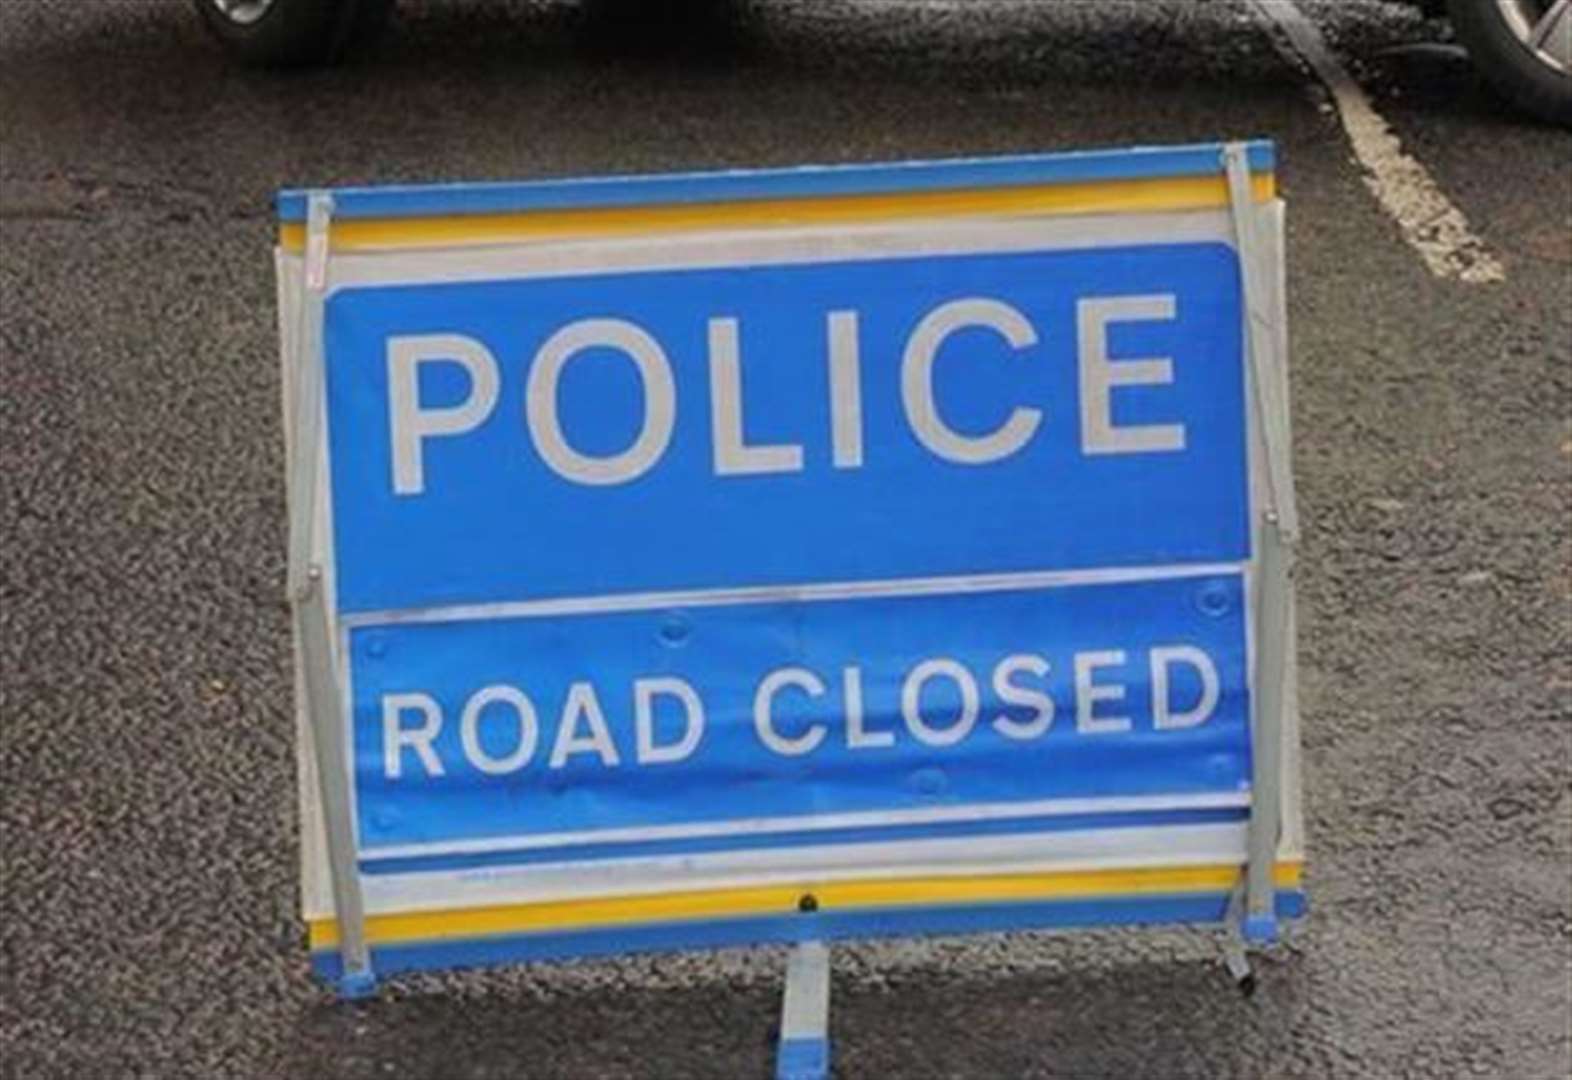 The road has been closed following a collision.